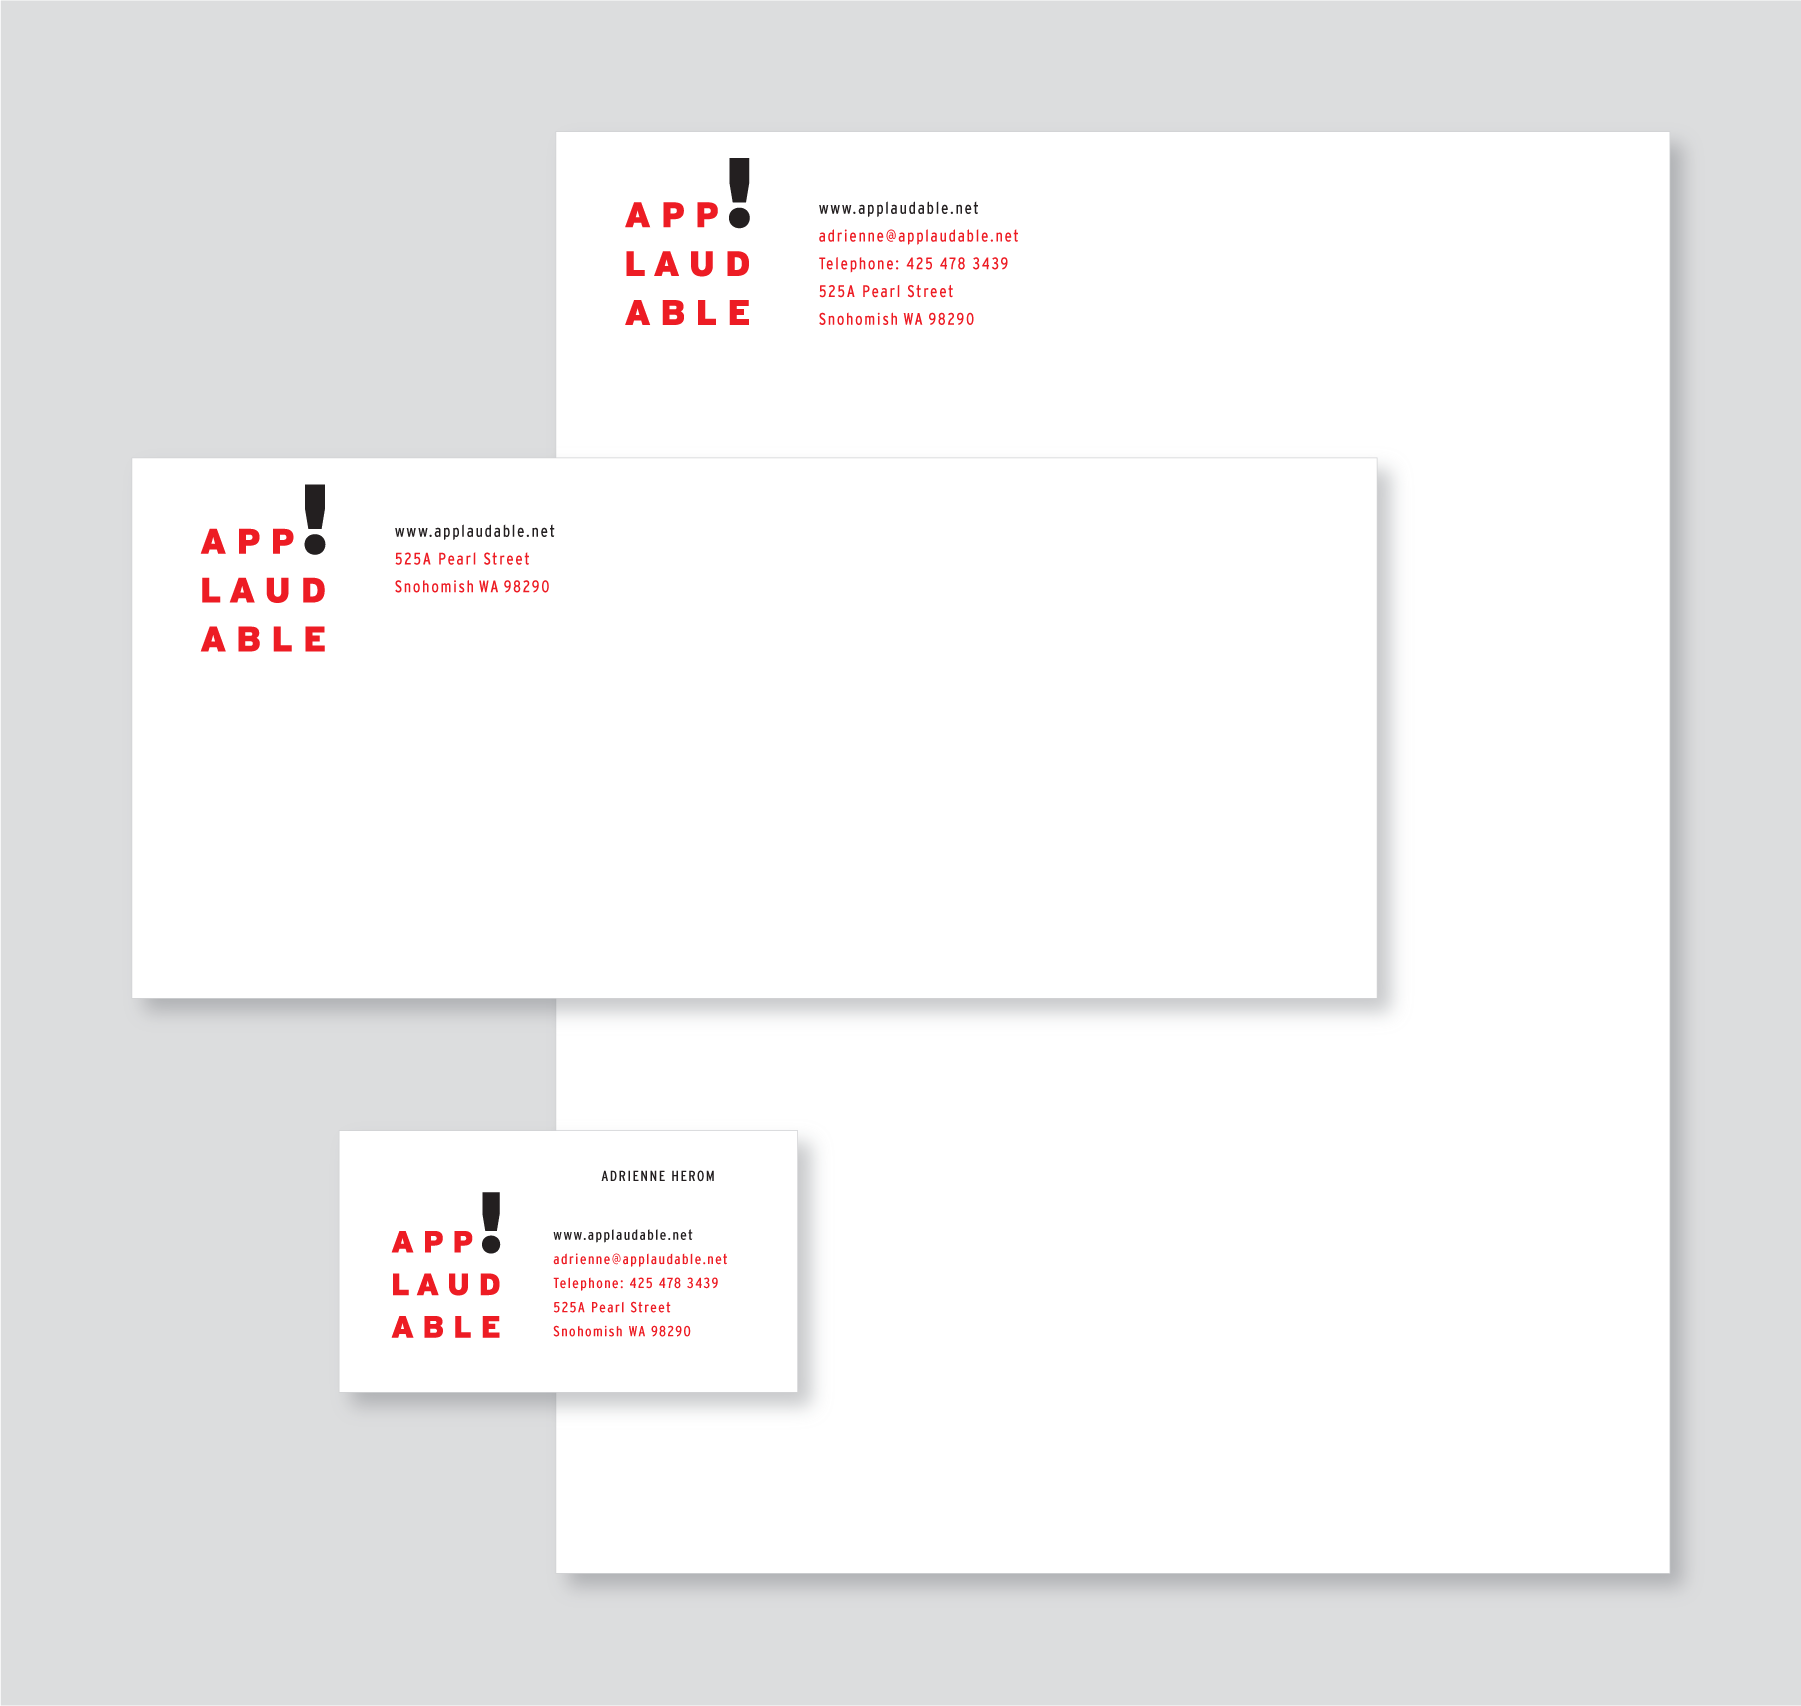 Stationery System Design, Applaudable